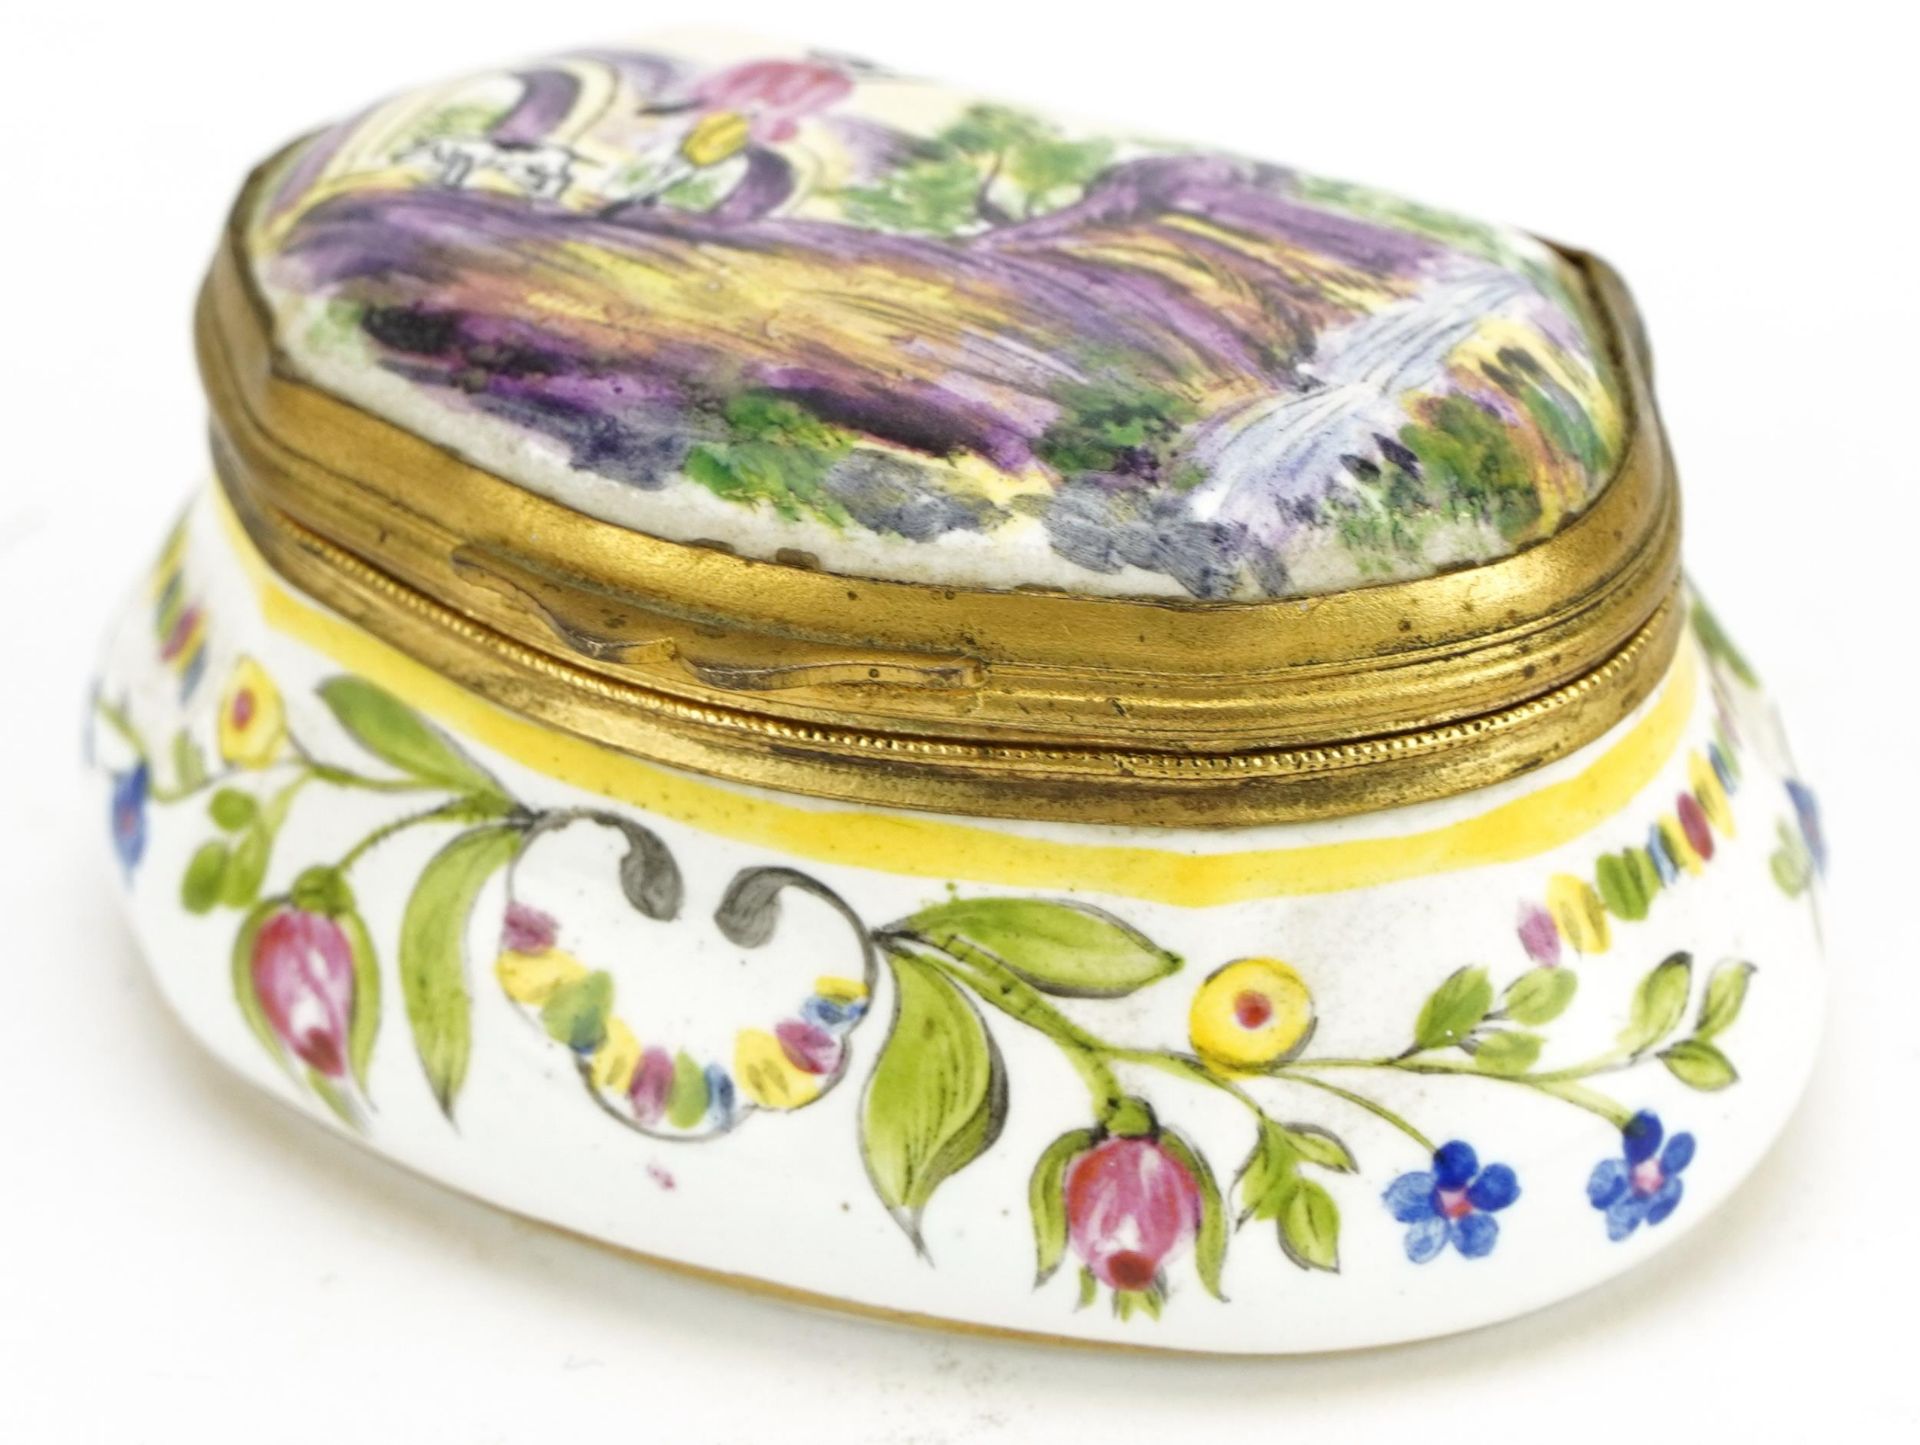 19th century European faience glazed patch box hand painted with a figure with dog and flowers,